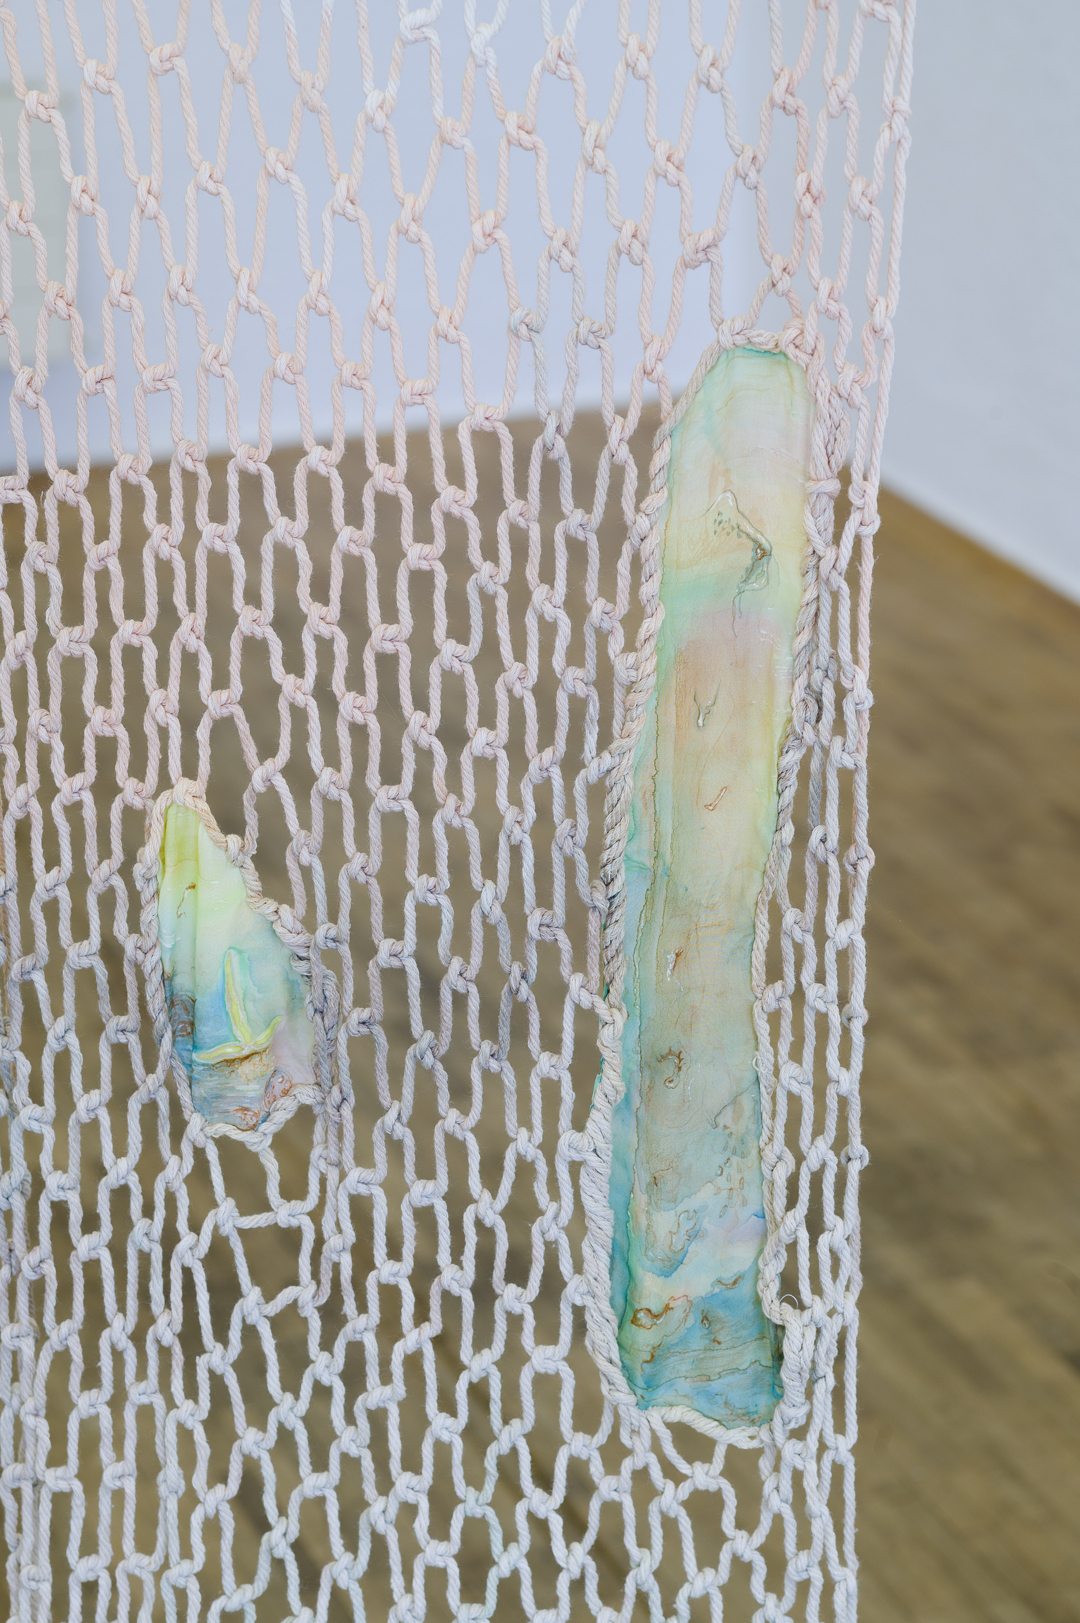 Veronika Abigail Beringer, Sternenrotz (detail), 2023, cotton thread, silk, silkpaint, iron bacteria pigment and ink, 280 x 80 cm